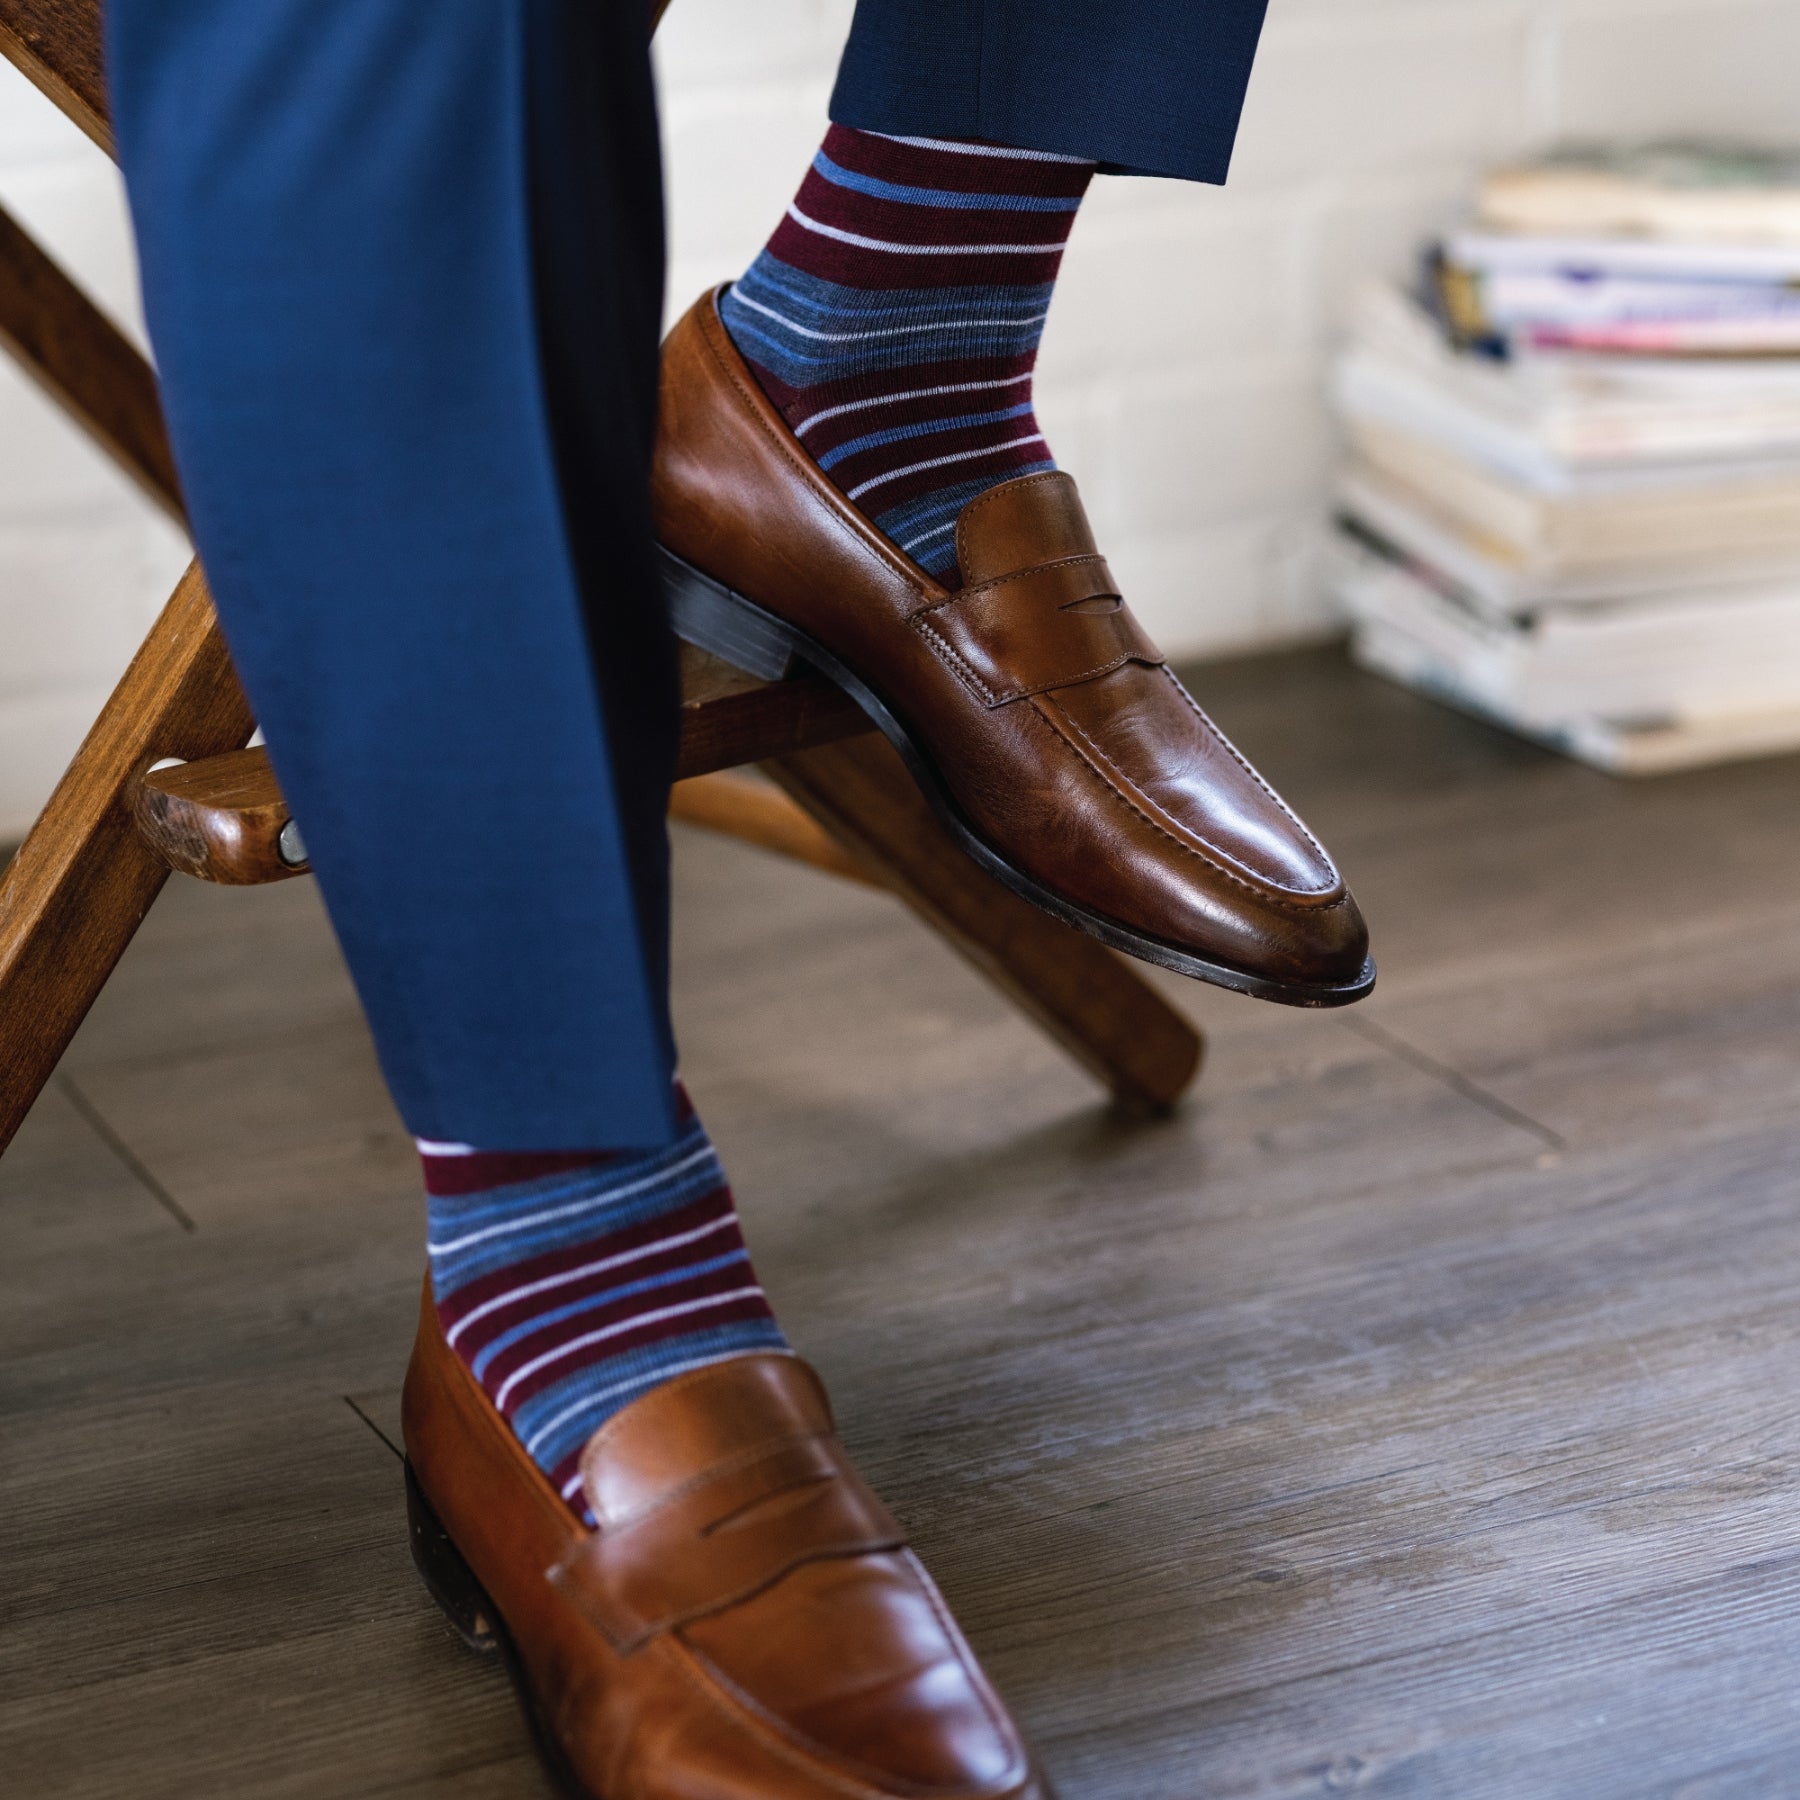 Deep red men's dress sock with blue and white stripes